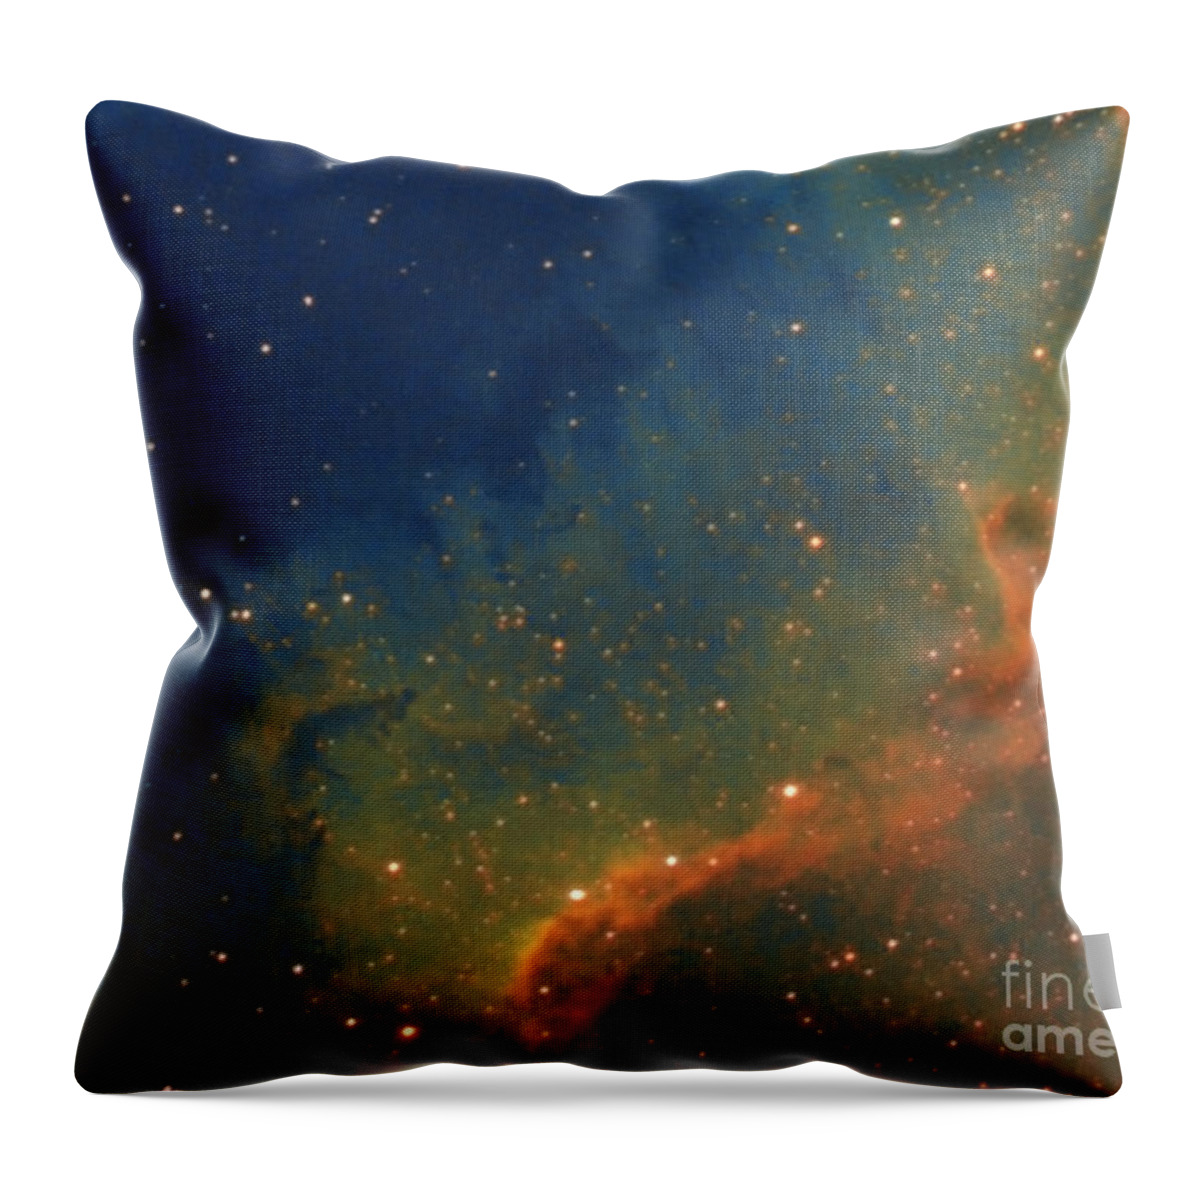 Cygnus Wall Throw Pillow featuring the photograph Cygnus Wall by Jerome Wilson